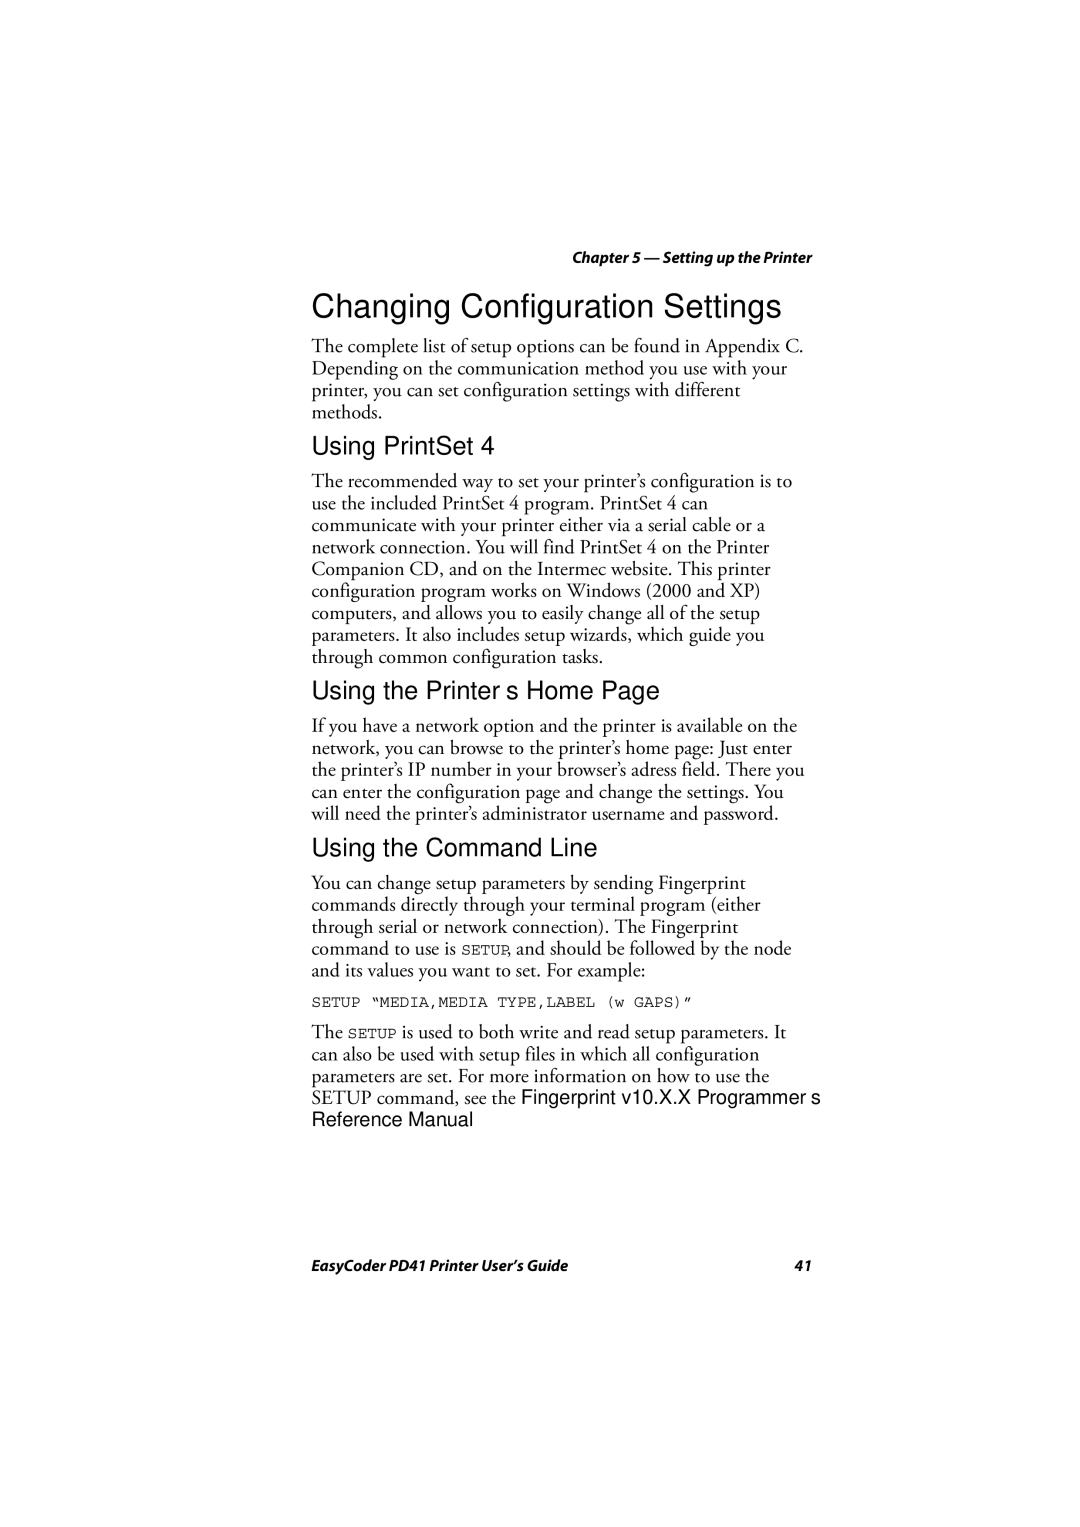 Intermec PD41 manual Changing Configuration Settings, Using PrintSet, Using the Printer’s Home, Using the Command Line 